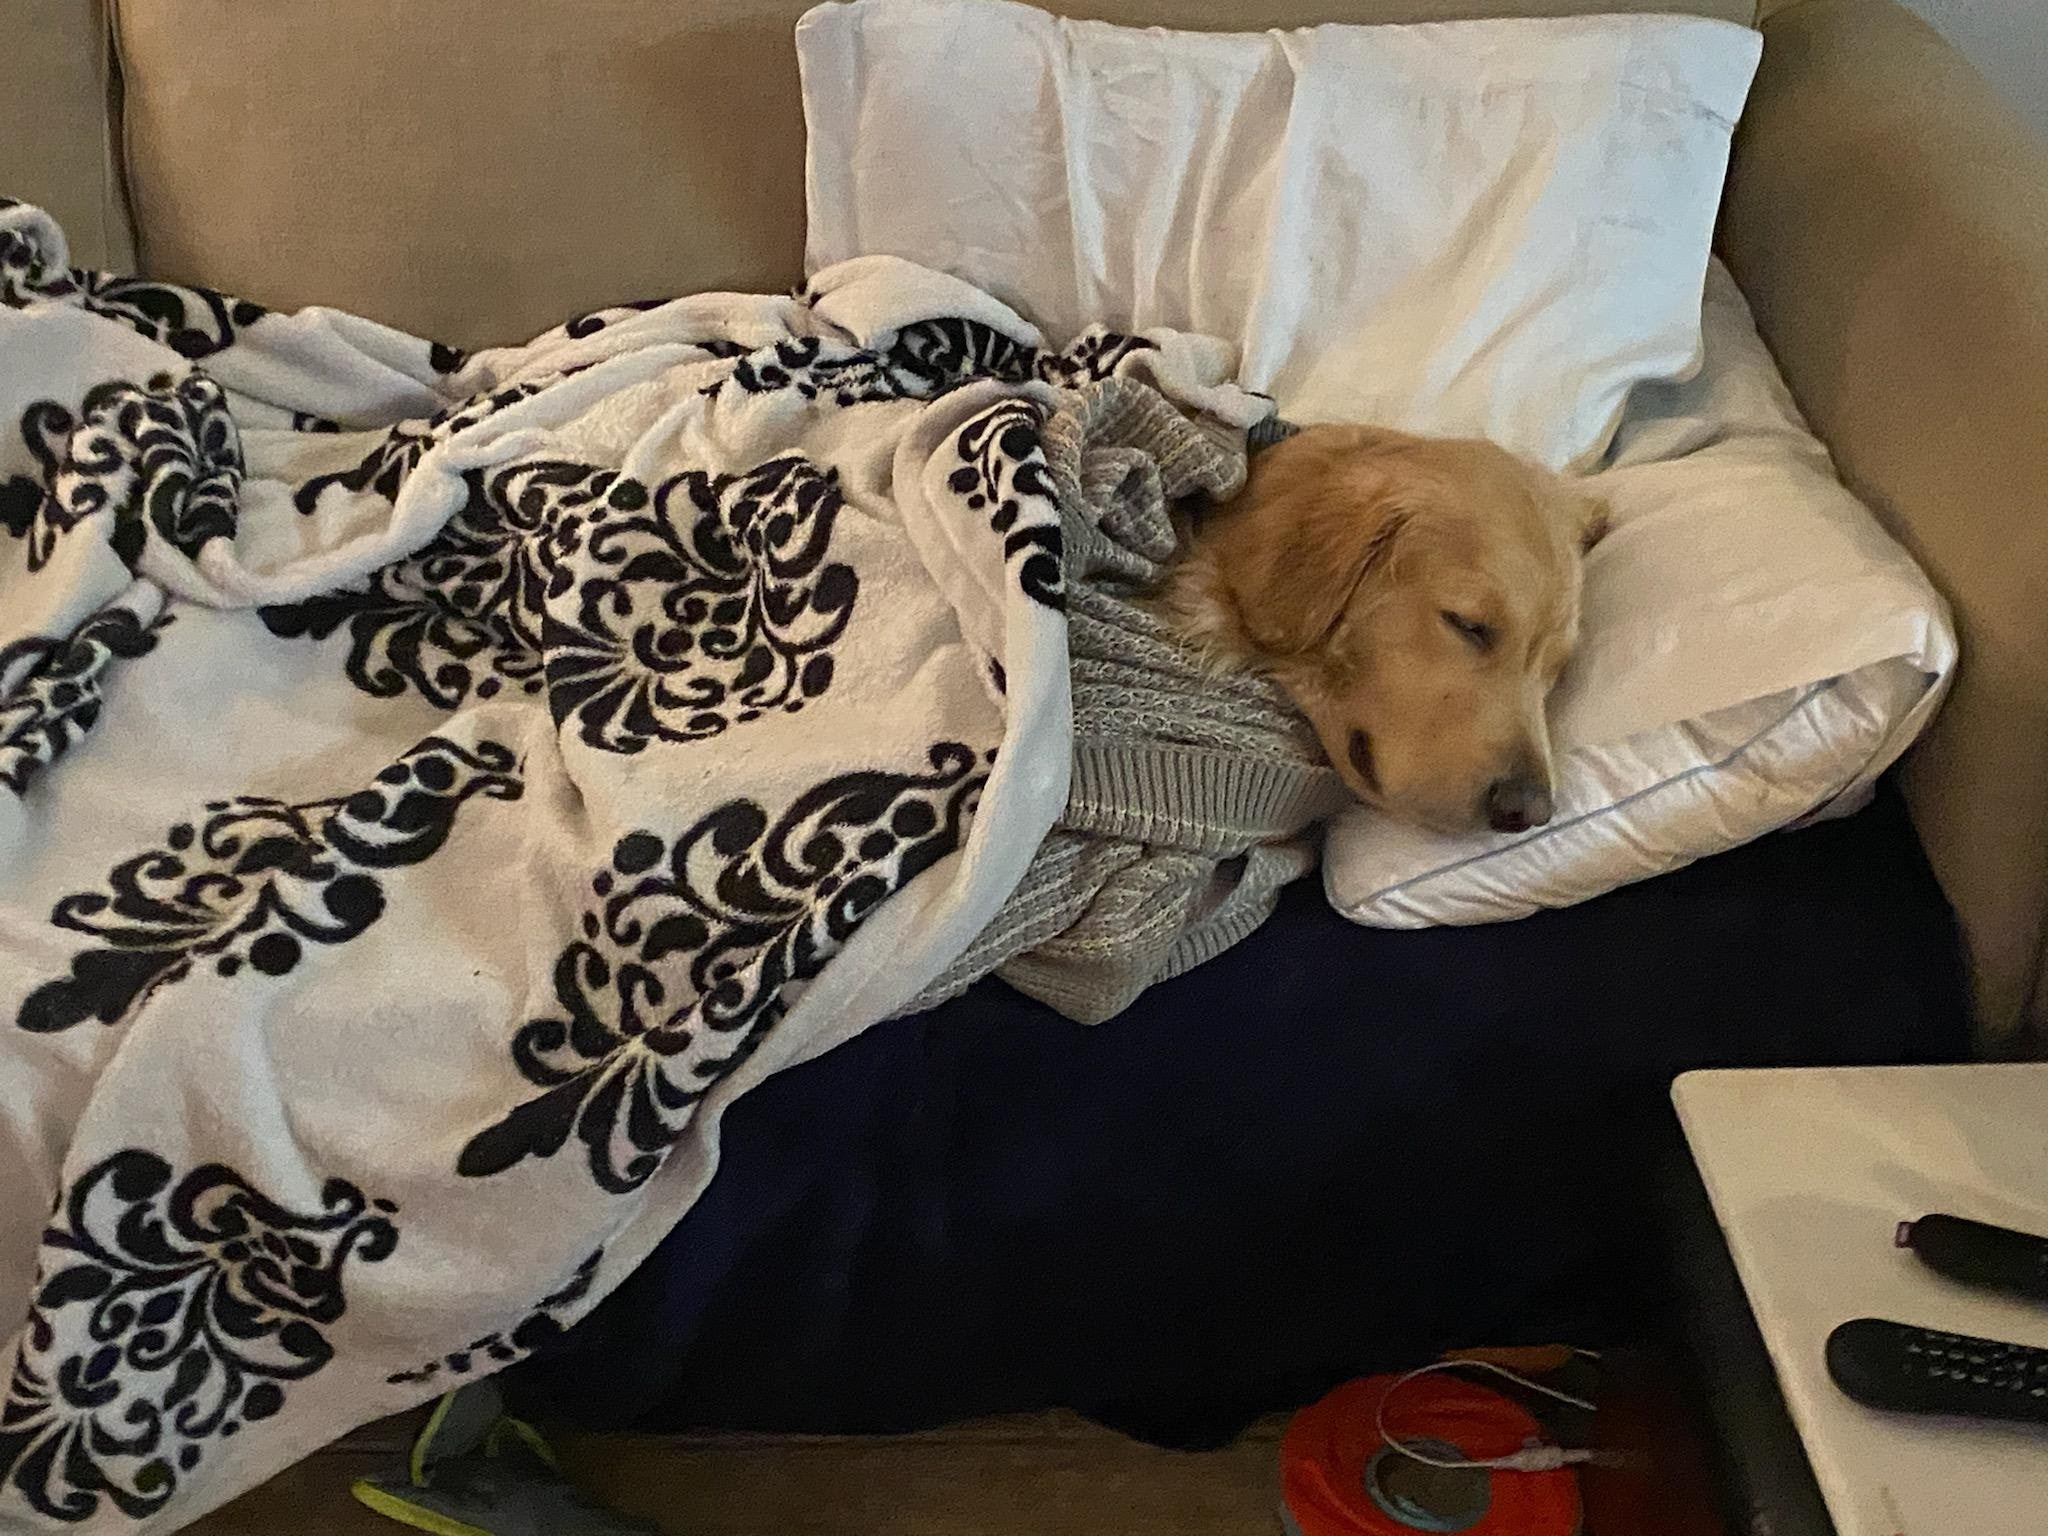 dog sleeping on couch, swaddled in blankets